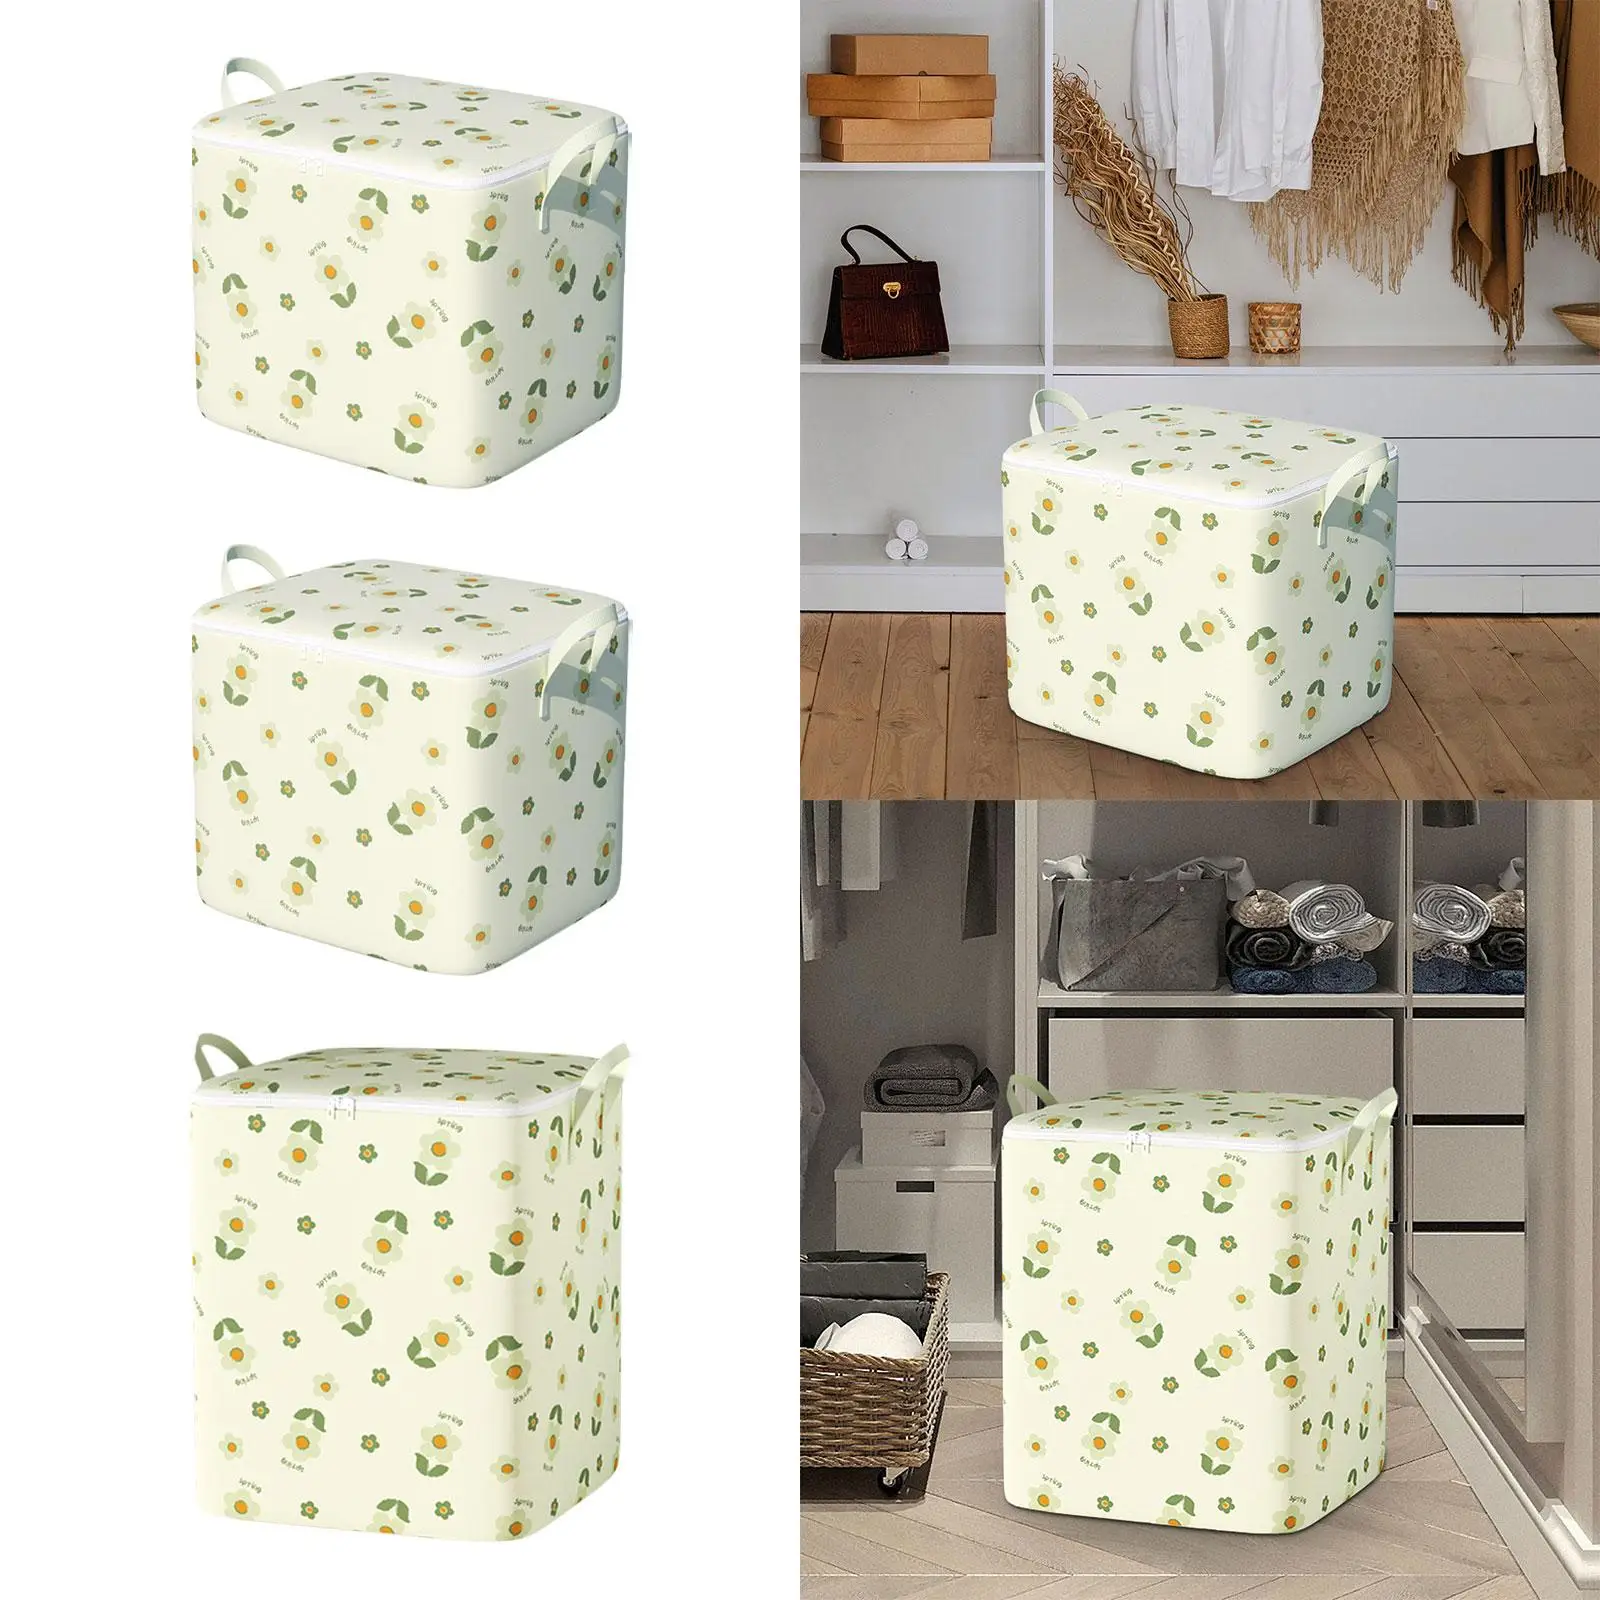 Clothes Storage Bag Sturdy Zippers Box Storage Container Clothes Storage Organizer for Toys Comforters Blanket Clothing Socks